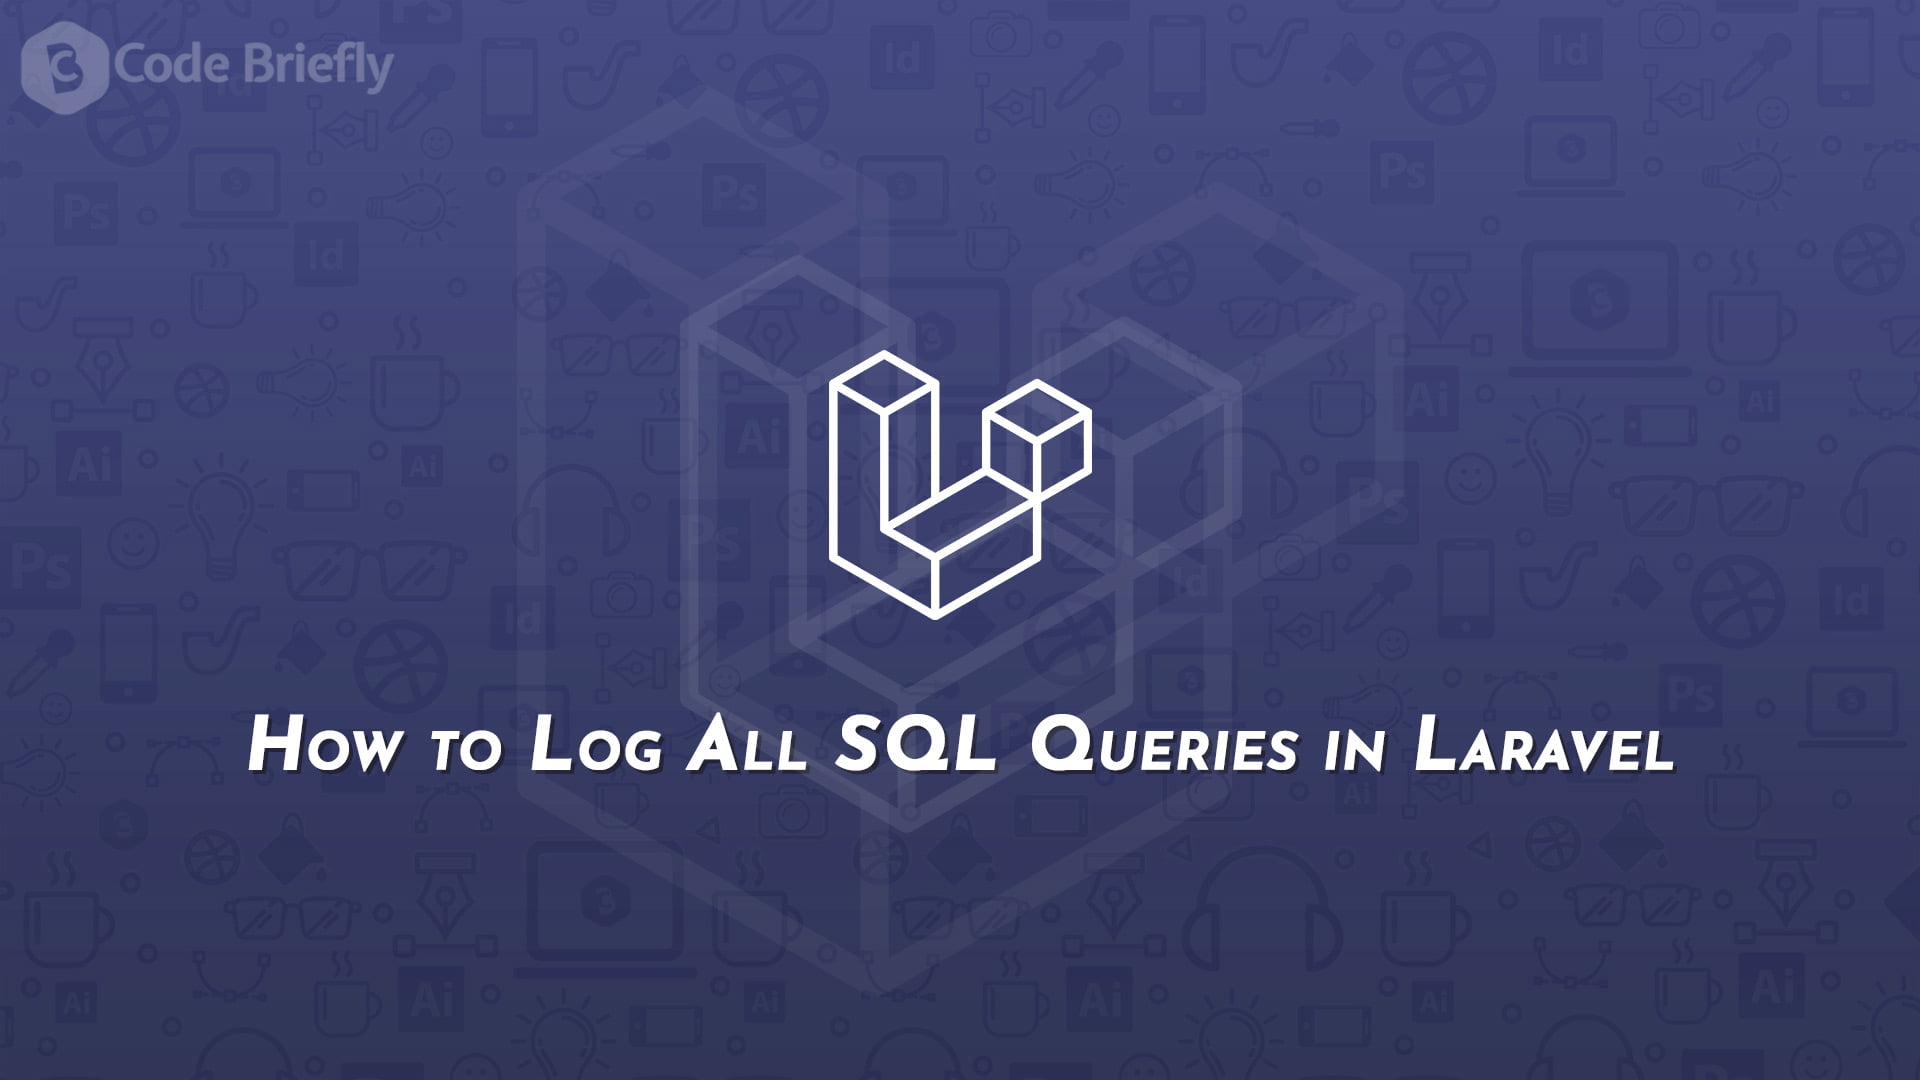 How to Log All SQL Queries in Laravel - Code Briefly